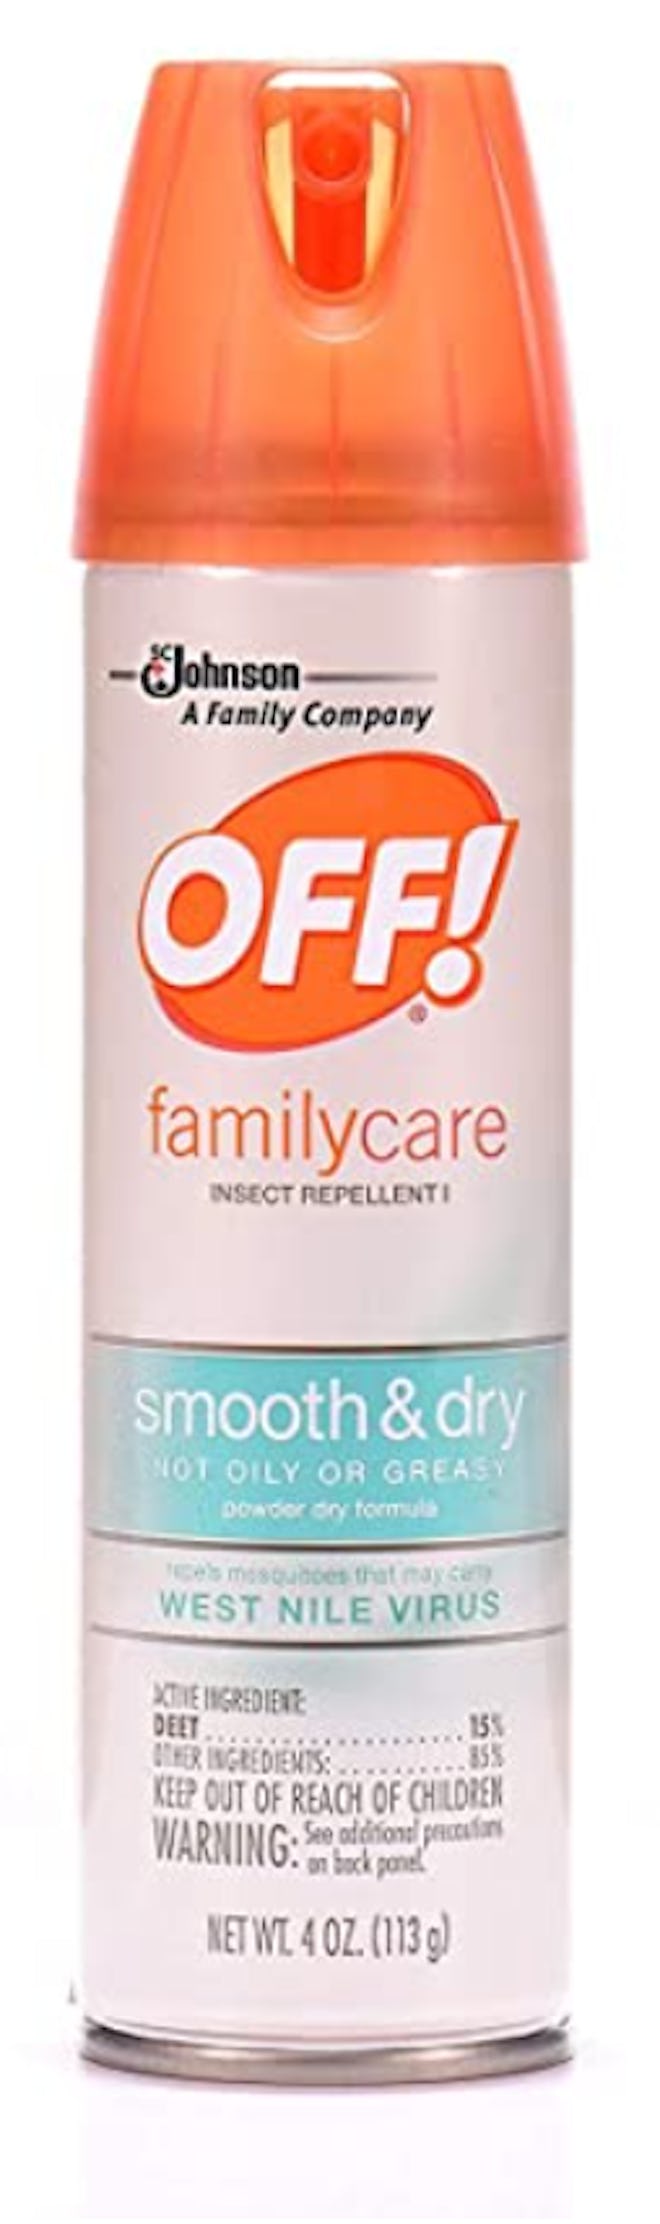 Off! Family Care Smooth & Dry Insect Spray